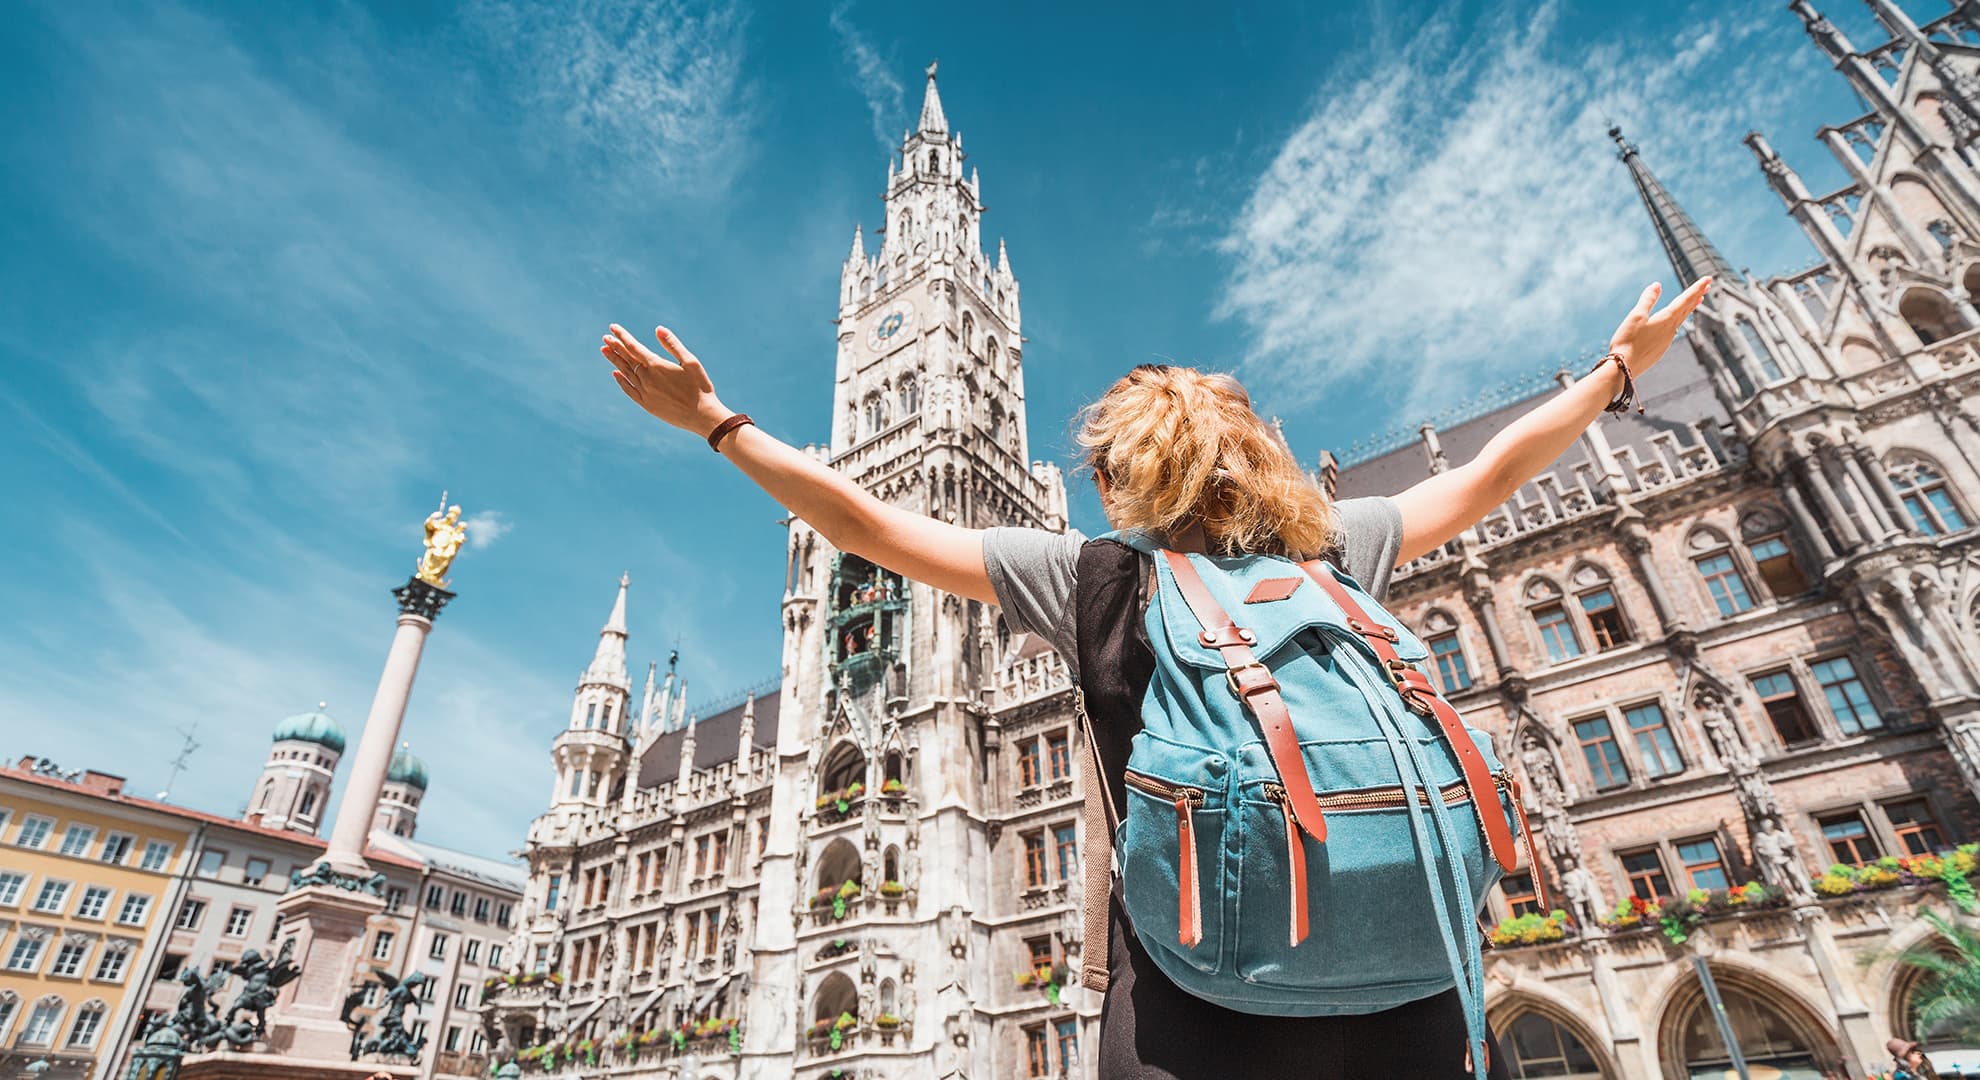 Female student with backpack discovers the old town hall in Munich, Germany